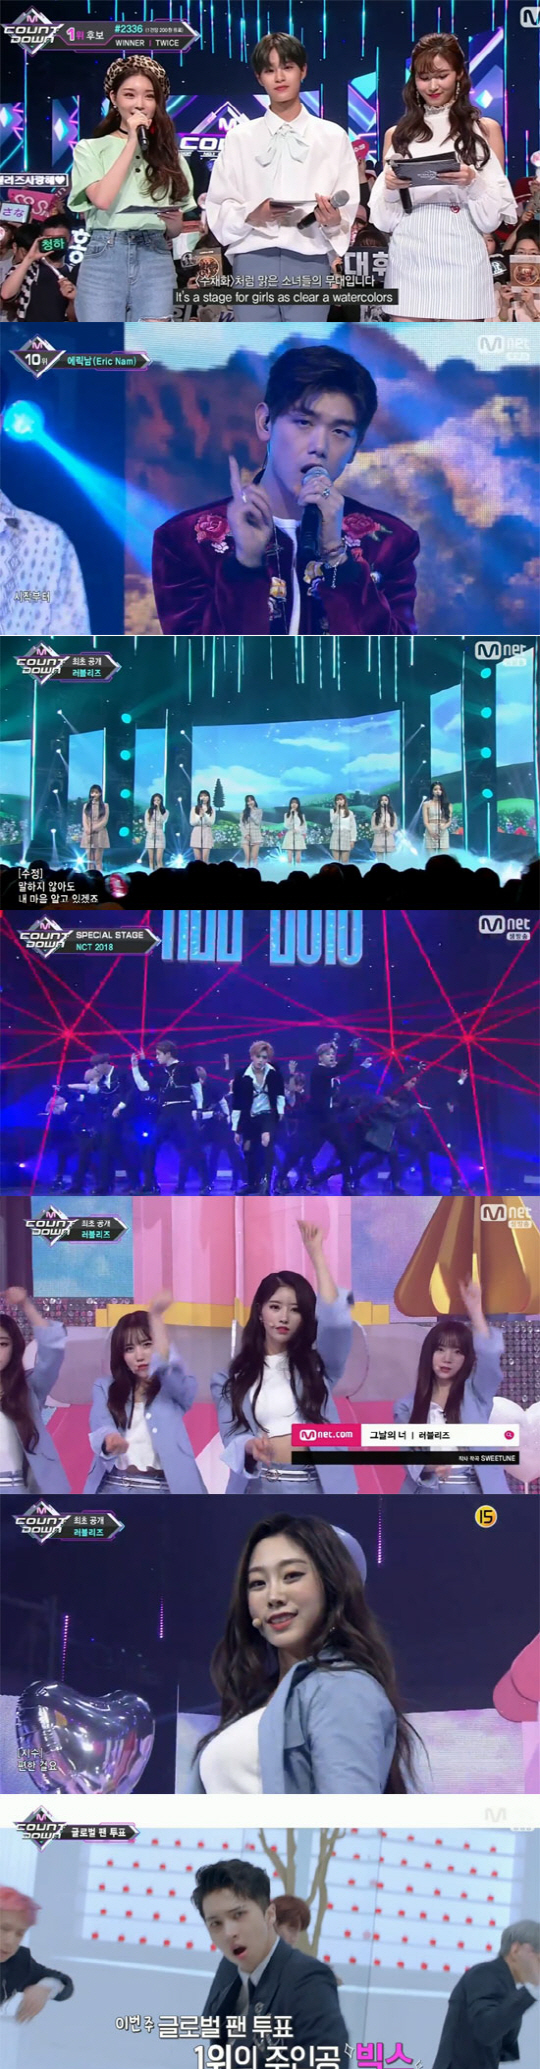 In Mnet M Countdowndown broadcast on the 26th, WINNER and TWICE confronted the first trophy.WINNERs Everyday and TWICEs What Orange Is the New Black Love? challenged first, and the owner of the trophy became TWICE.As a result, TWICE has been popular for two weeks with the music broadcast Seven-time King with What Orange Is the New Black Love?Mnet M Countdowndown, KBS2 Music Bank, MBC Show!TWICE is the first music broadcasting company to win all the music broadcasts such as Music Center and SBS popular song and collects the second trophy. TWICE is the number one player in most competitions such as music sales, music sales, social media, and Mnet broadcasting scores except global fan voting.When TWICE came to the top, Sana, who was in charge of MC, said, I am more pleased to be in the top spot at the time of M Countdowndowndowns new, and to be in the top spot while MC is in charge.I am really grateful for Once, who gives me a lot of love because there are many shortages, he said.Da-hyun said, Thank you Mnet for staying at the end of What Orange Is the New Black Love activity. I love Once.I will be a TWICE who will work harder. First, VIXX won the first place in the global fan vote this week and showed the dignity of the global Korean Wave.The members who came back with the title song Incense and turned into six steering staff showed delicate vocals and sensual choreography and gave off a deadly charm.Scentist is a Future EDM genre song with an impressive dreamy yet trendy sound, featuring lyrics that are poetically expressed about the fragrance.Lovelyz released the title song You of the Day and the song Watercolor for the first time.You on the day is a song that shows youthful and light energy, maximizing Lovelyzs pure and clear charm.The members showed a fresh voice and a pure visual through the stage today. NCT 2018 also unveiled the Black on Black stage, which overwhelms the eye.Black on Black is a song that decorates the US of the super-sized project NCT 2018. It shows the overwhelming scale of the NCT complete with 18 members showing the stage full of knife and intense performance.